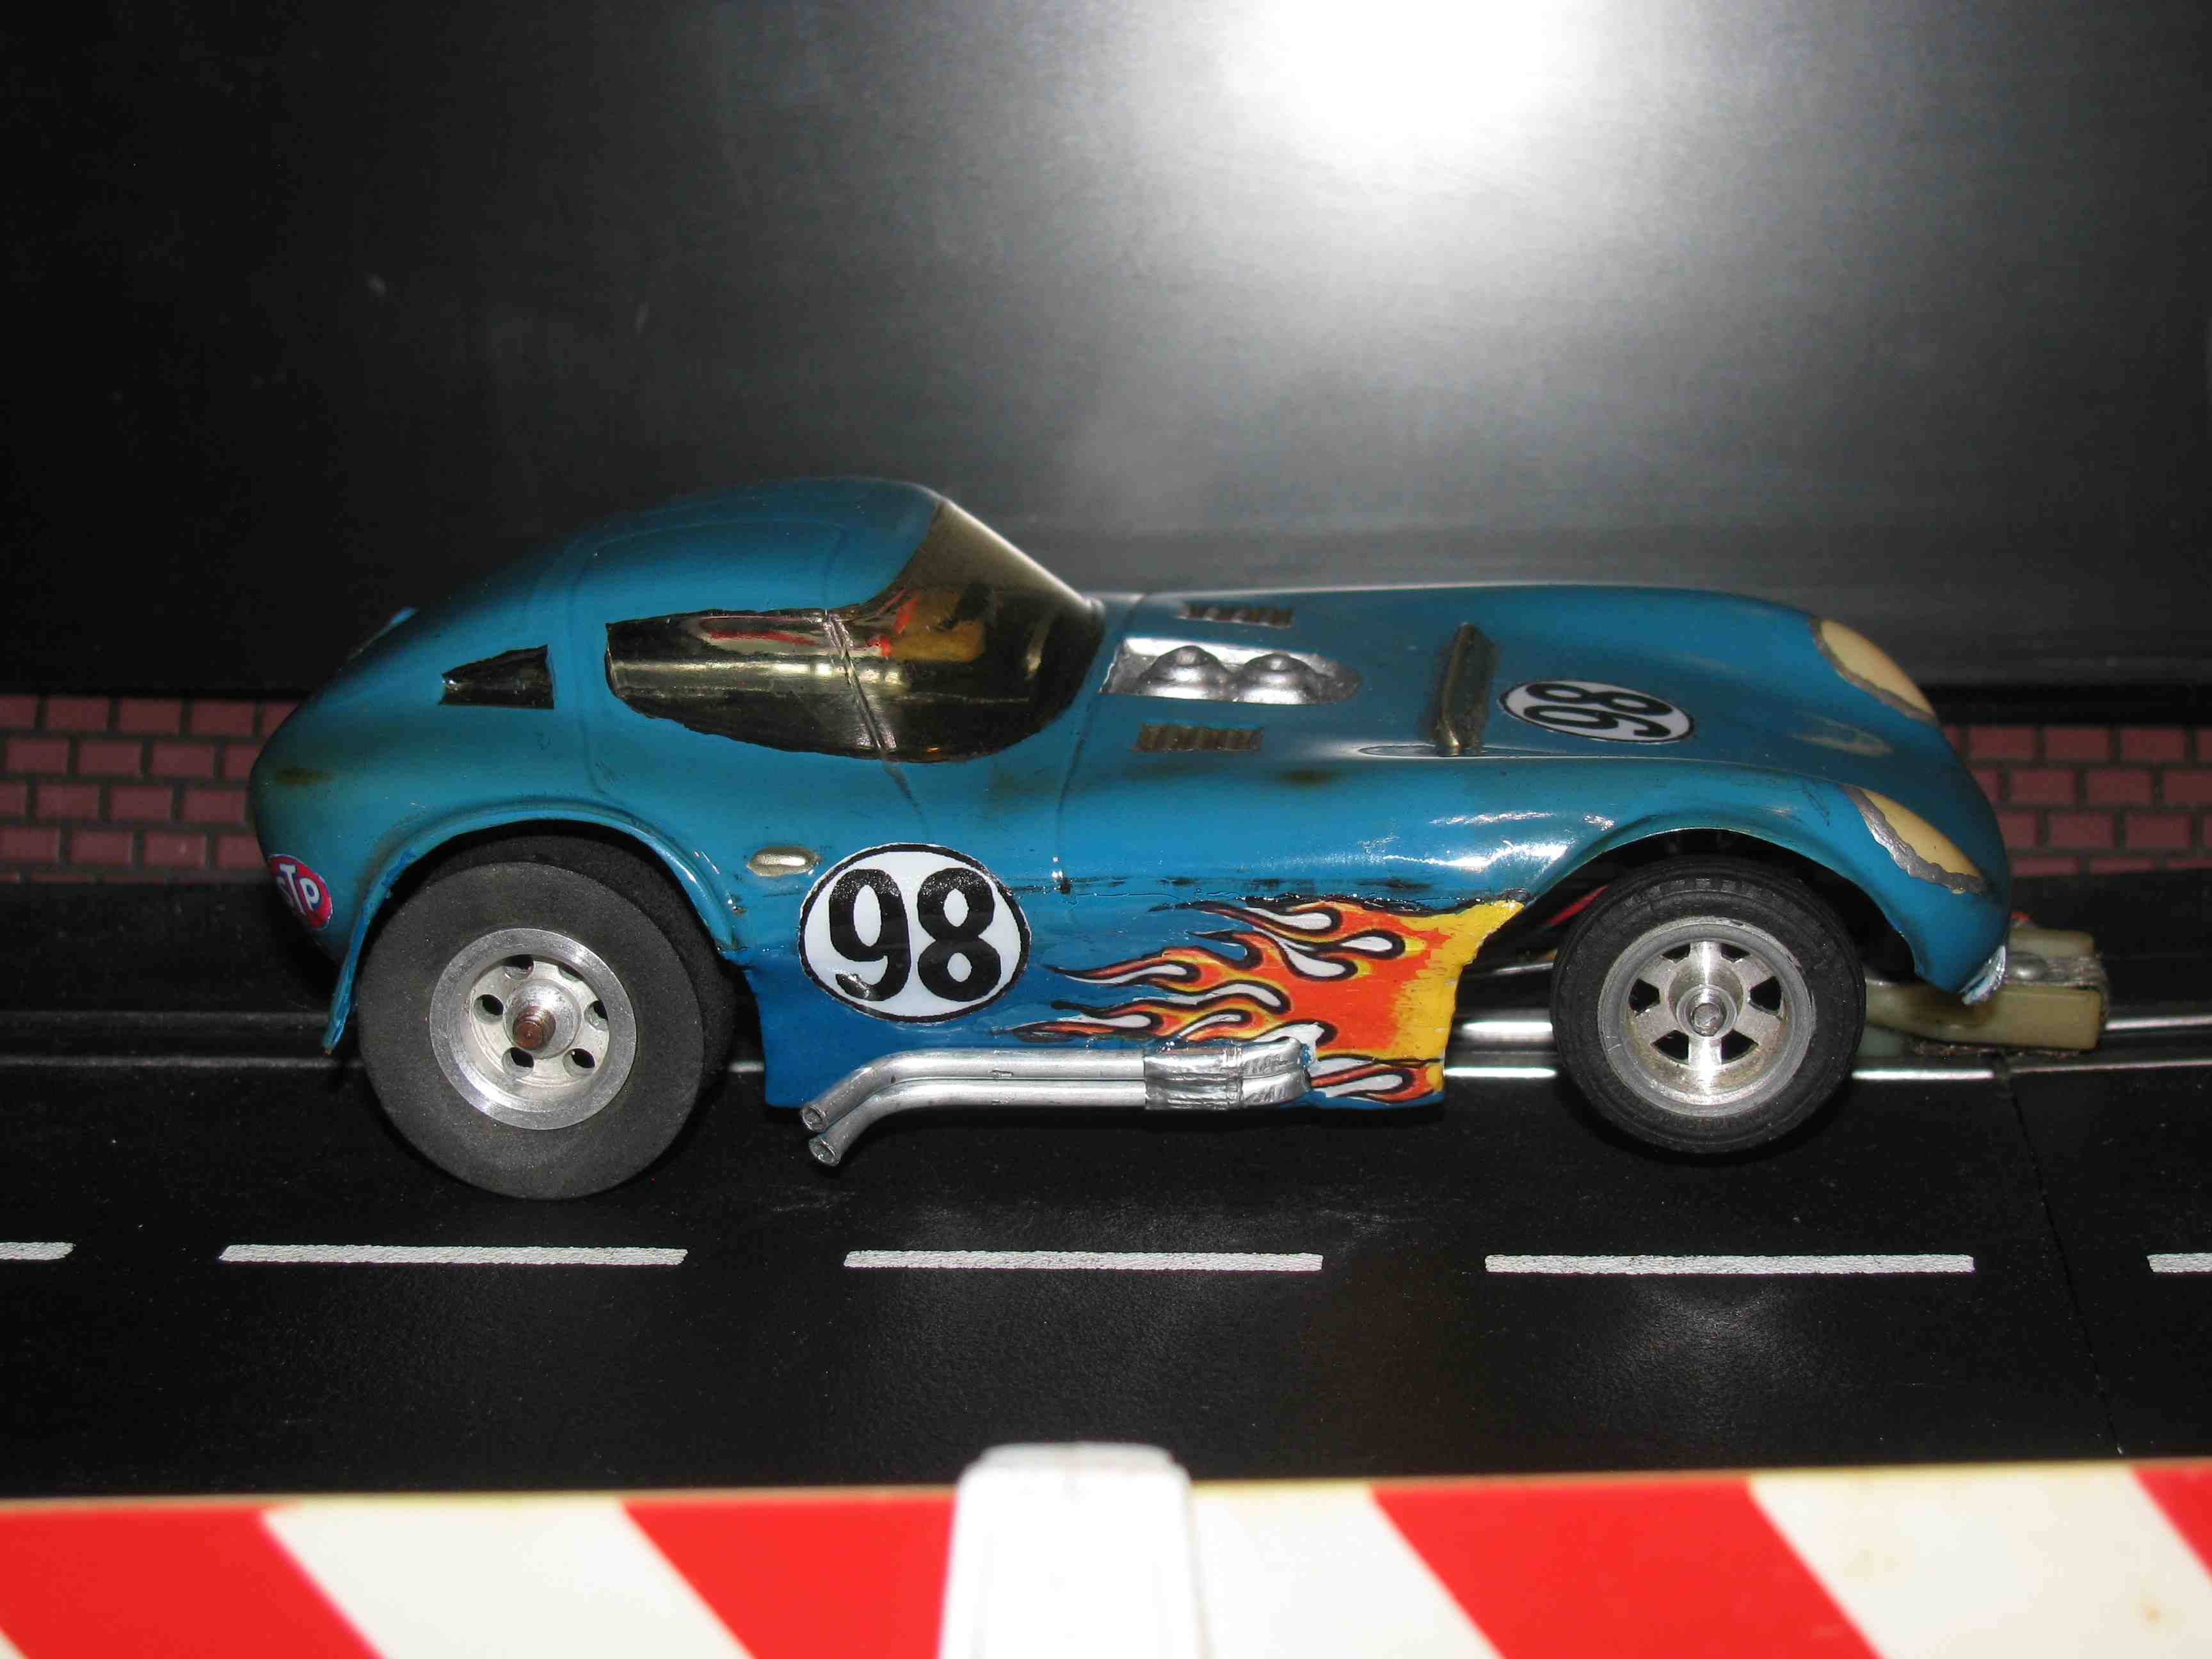 * SOLD * Vintage Ultra-Light Cheetah Racer with Custom Brass Chassis Slot Car - 1/32 Scale – Blue – Car #98